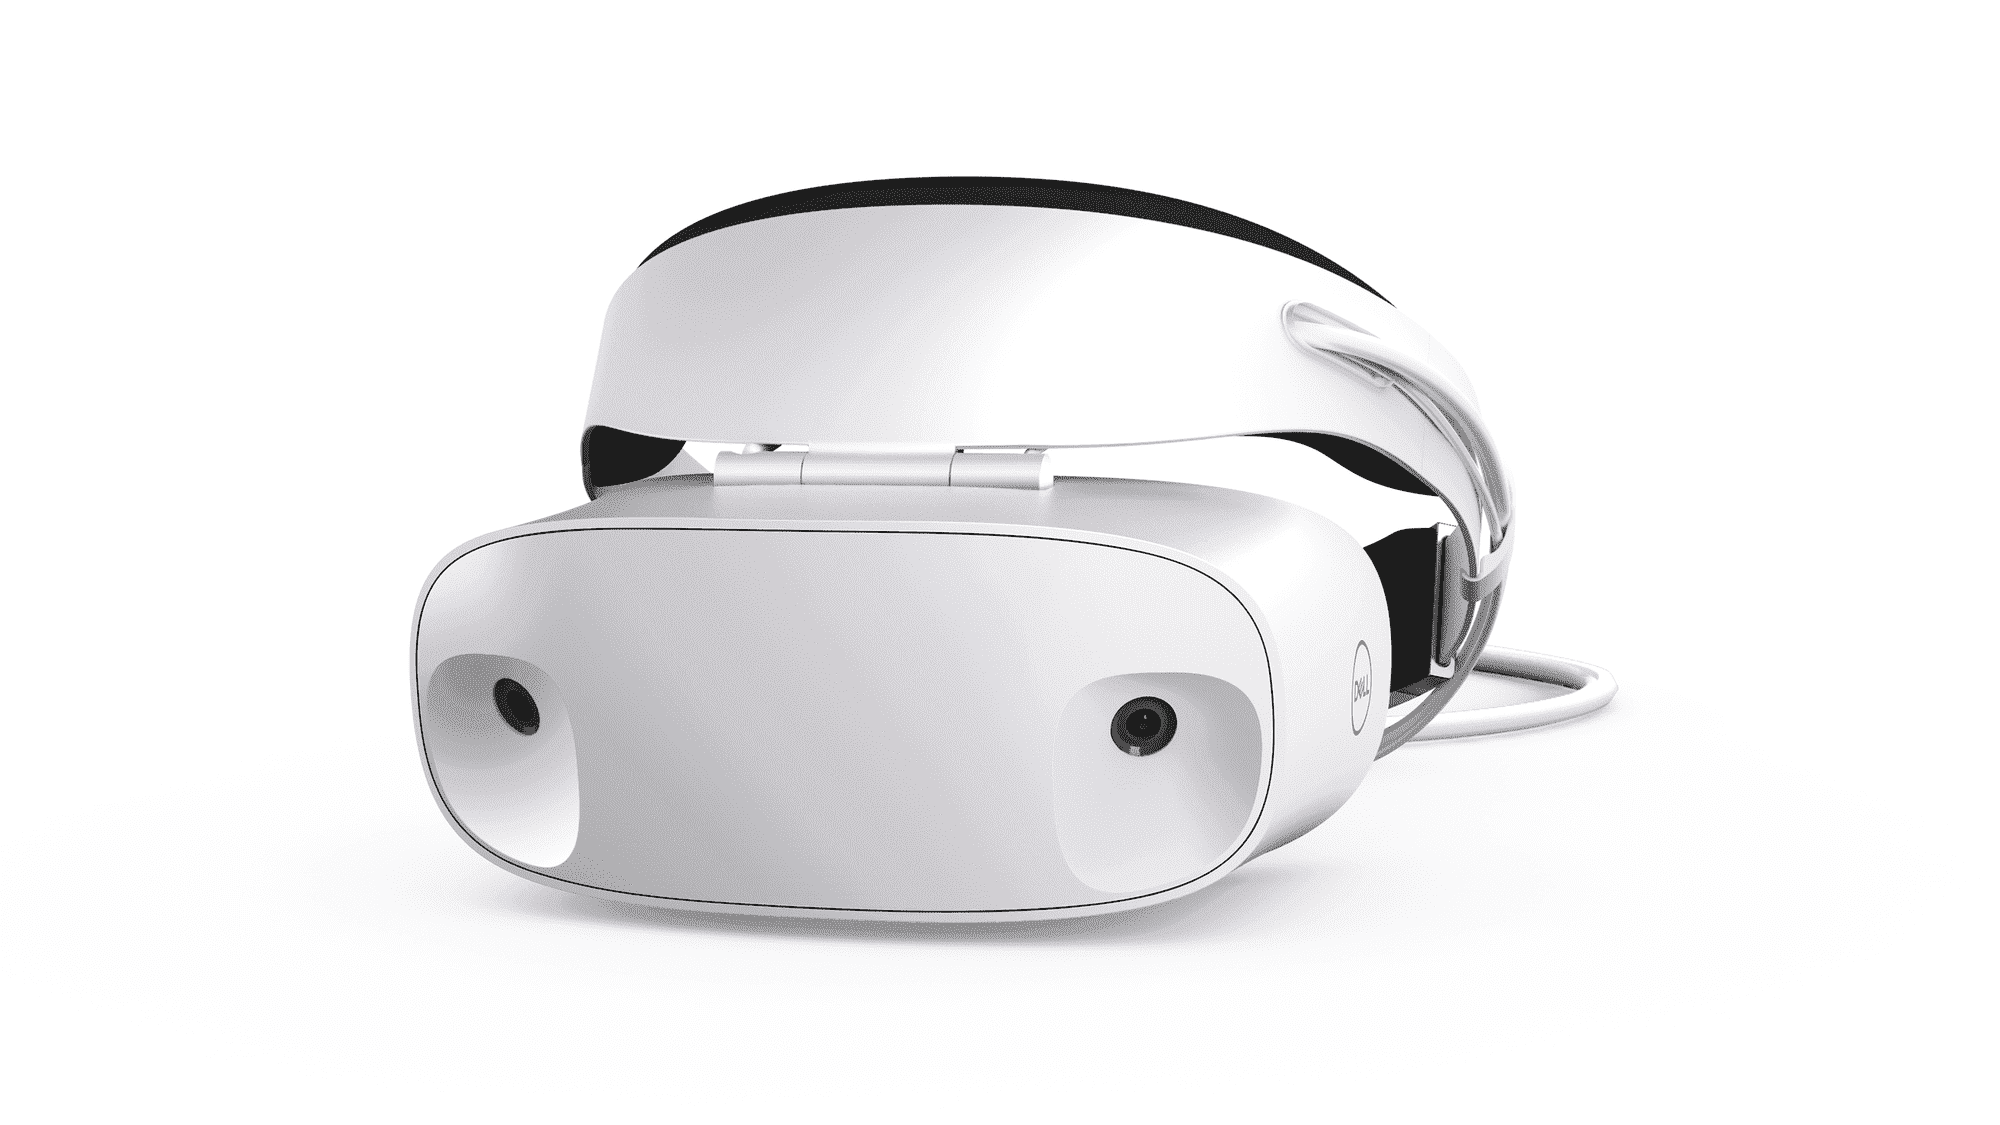 Samsung HMD Odyssey+ Windows Mixed Reality headset spotted online 9cee6486379e283bc39d8c5ab8826163.png